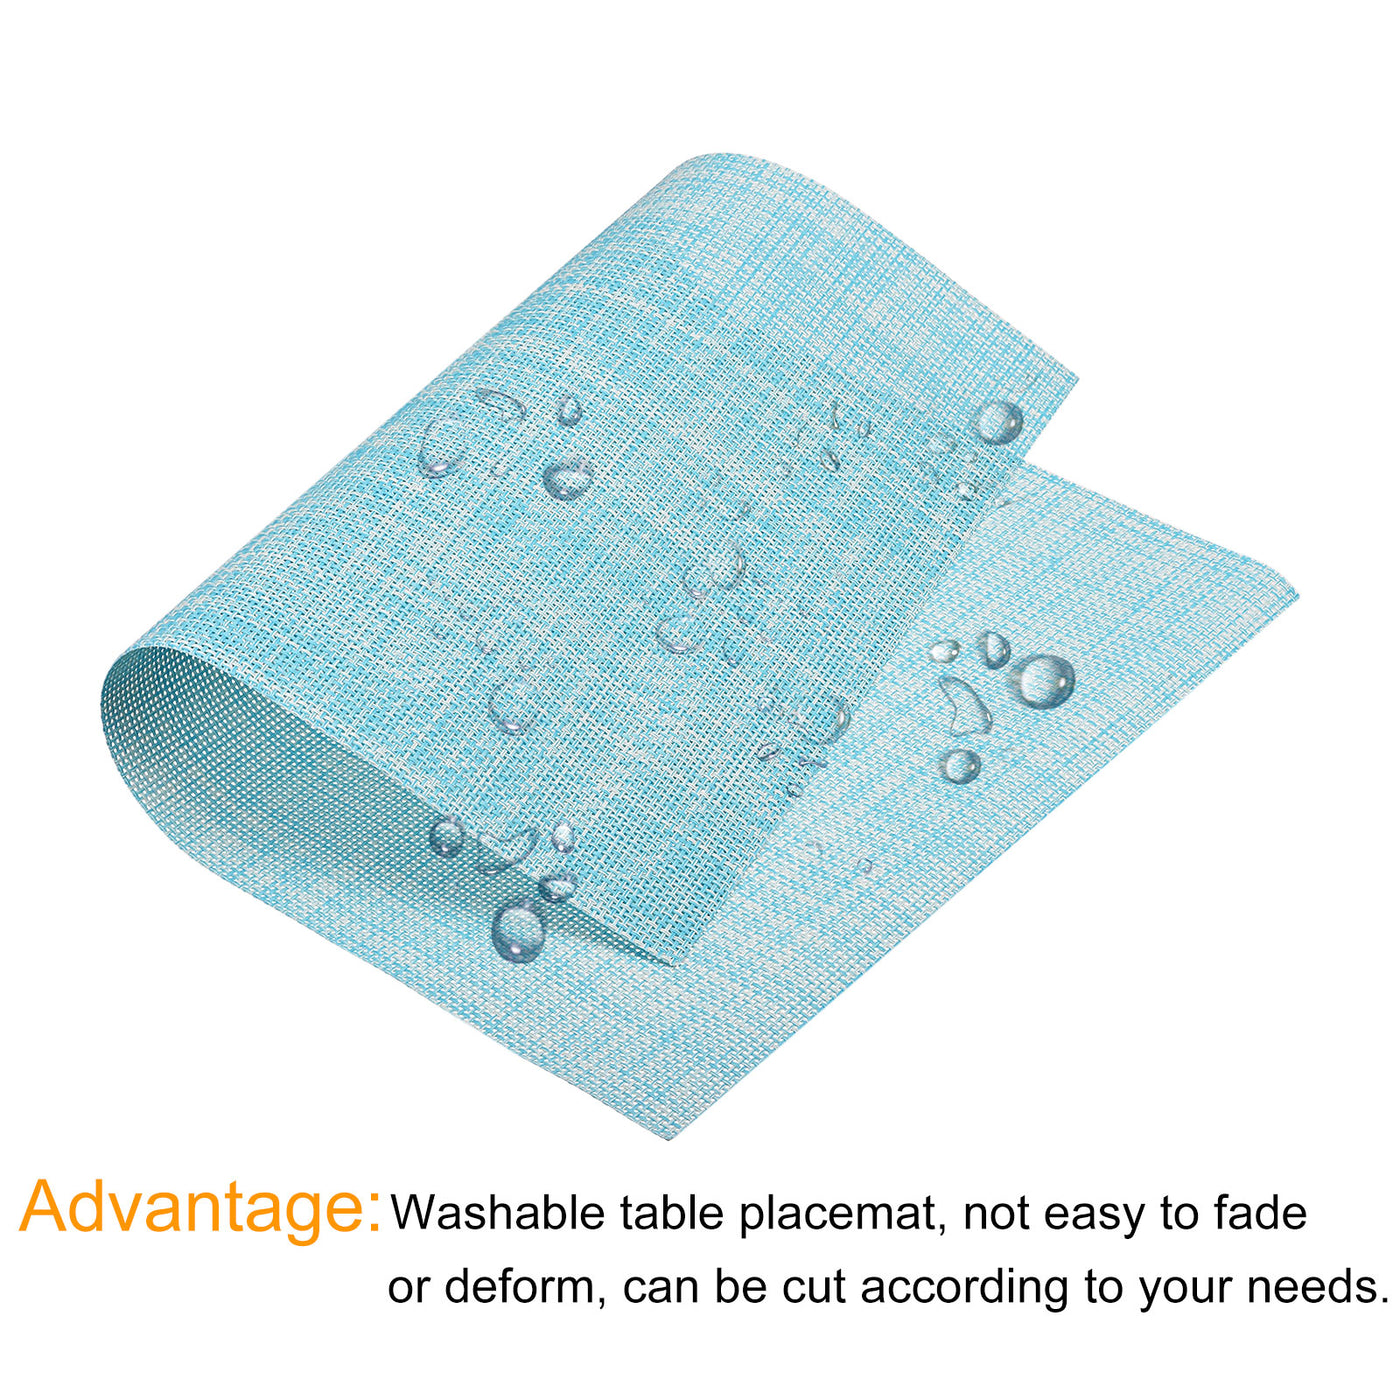 uxcell Uxcell Place Mats, 450x300mm Table Mats Set of 8 PVC Washable Woven Placemat Blue